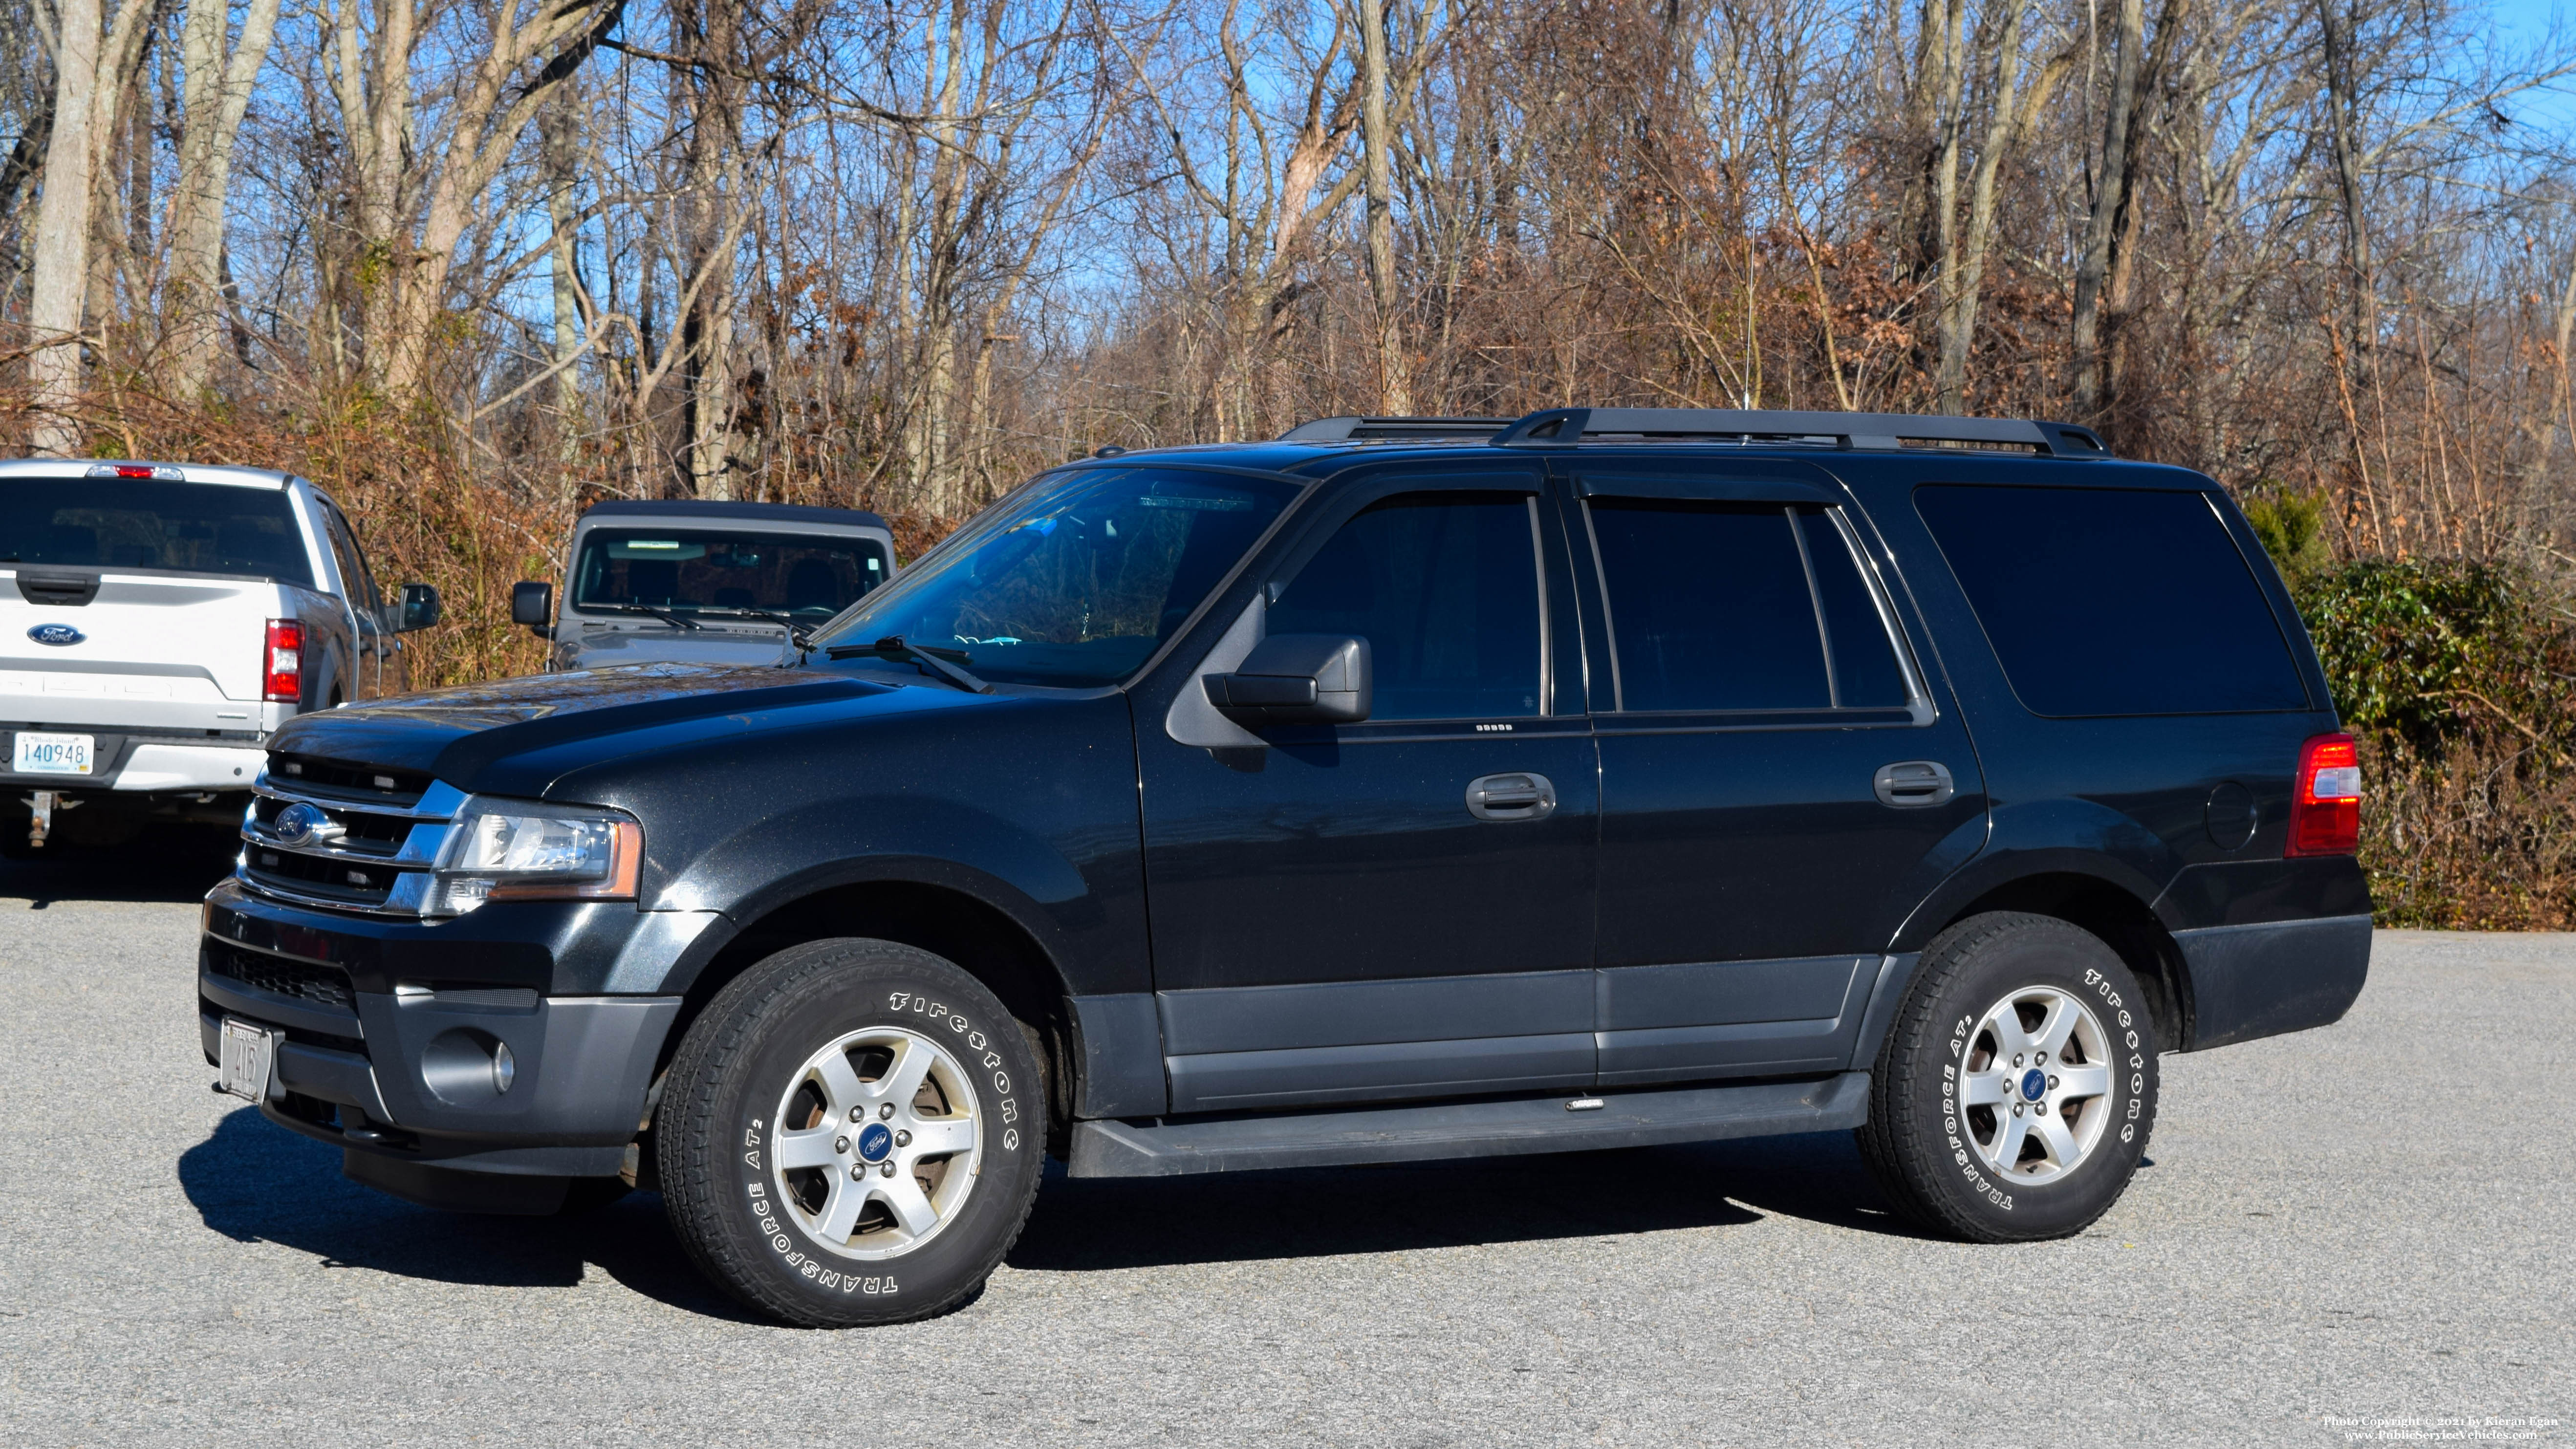 A photo  of North Kingstown Fire
            Car 1, a 2018 Ford Expedition             taken by Kieran Egan